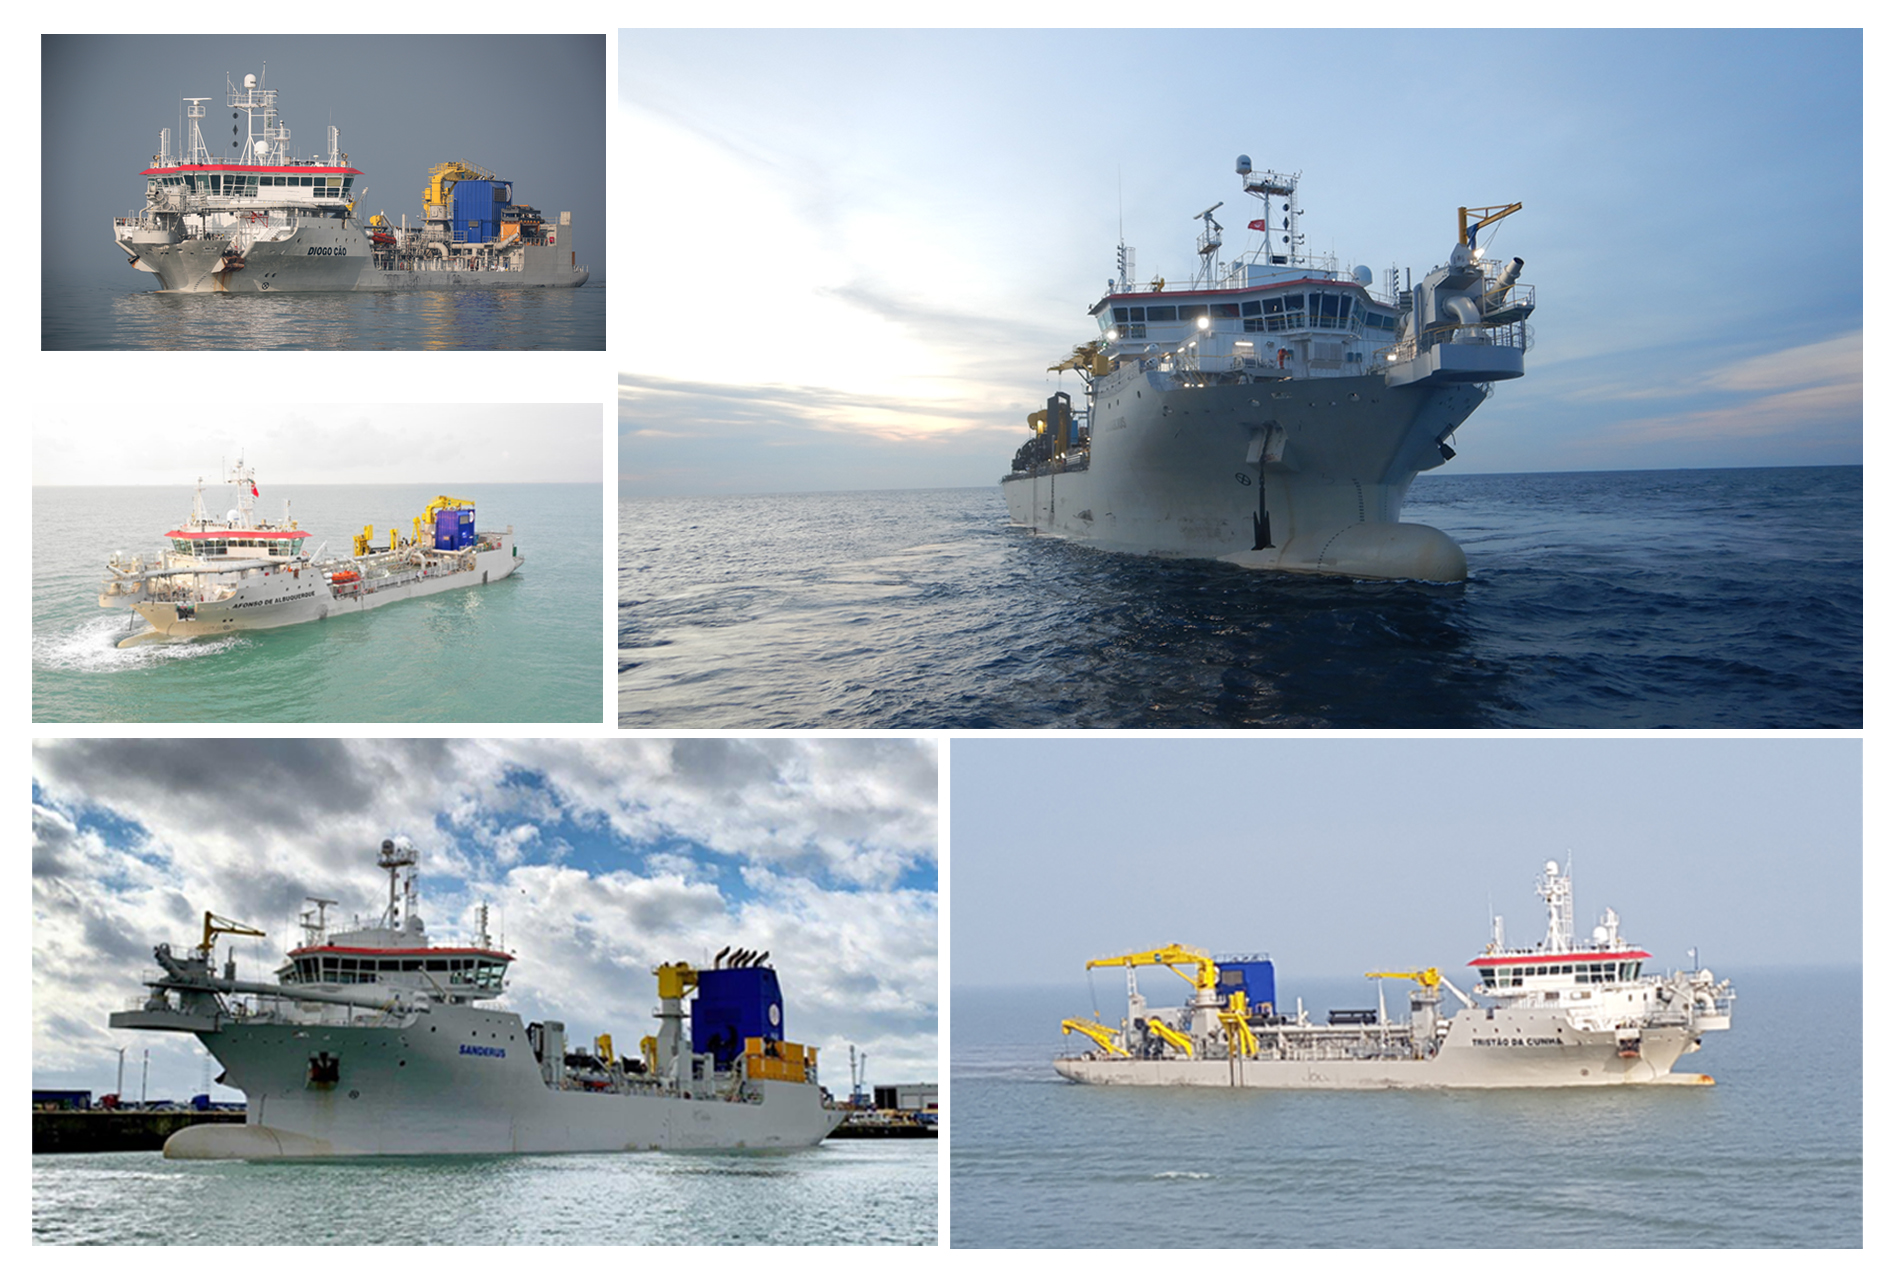 Jan de Nul vessels to receive the BV ULEV Notation